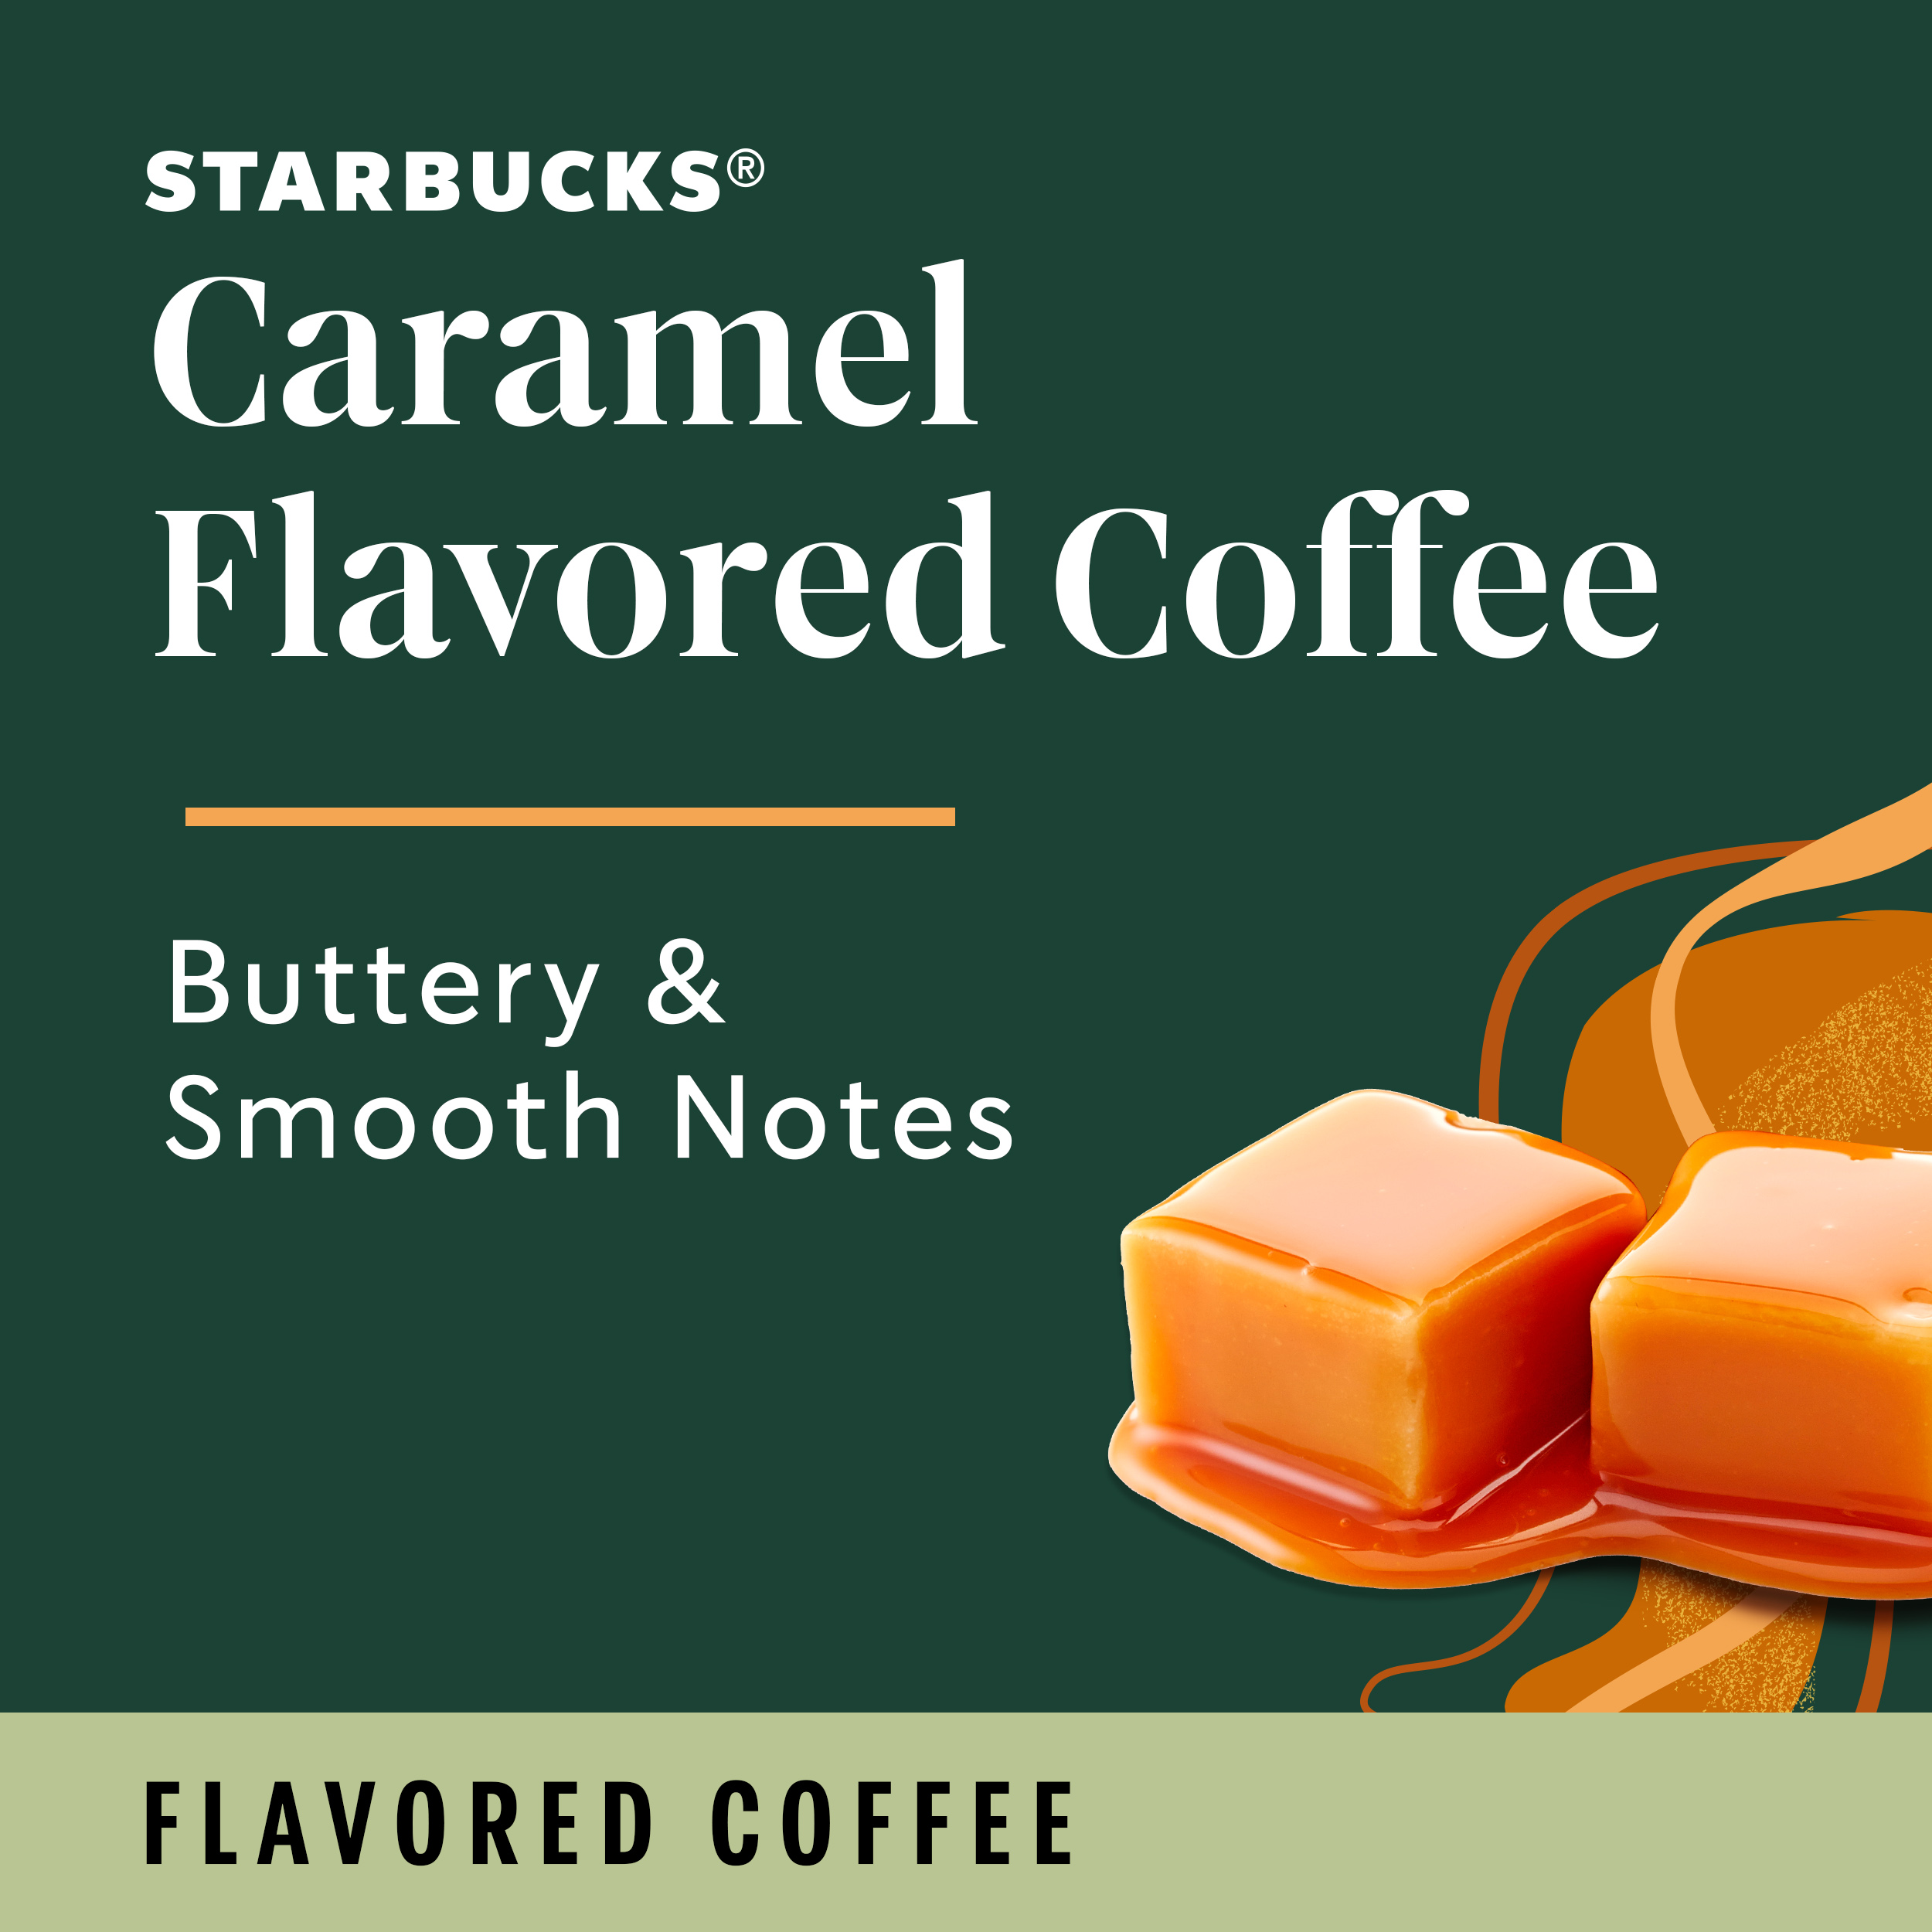 Starbucks Caramel Flavored, Ground Coffee, Naturally Flavored, 7 oz - image 3 of 8